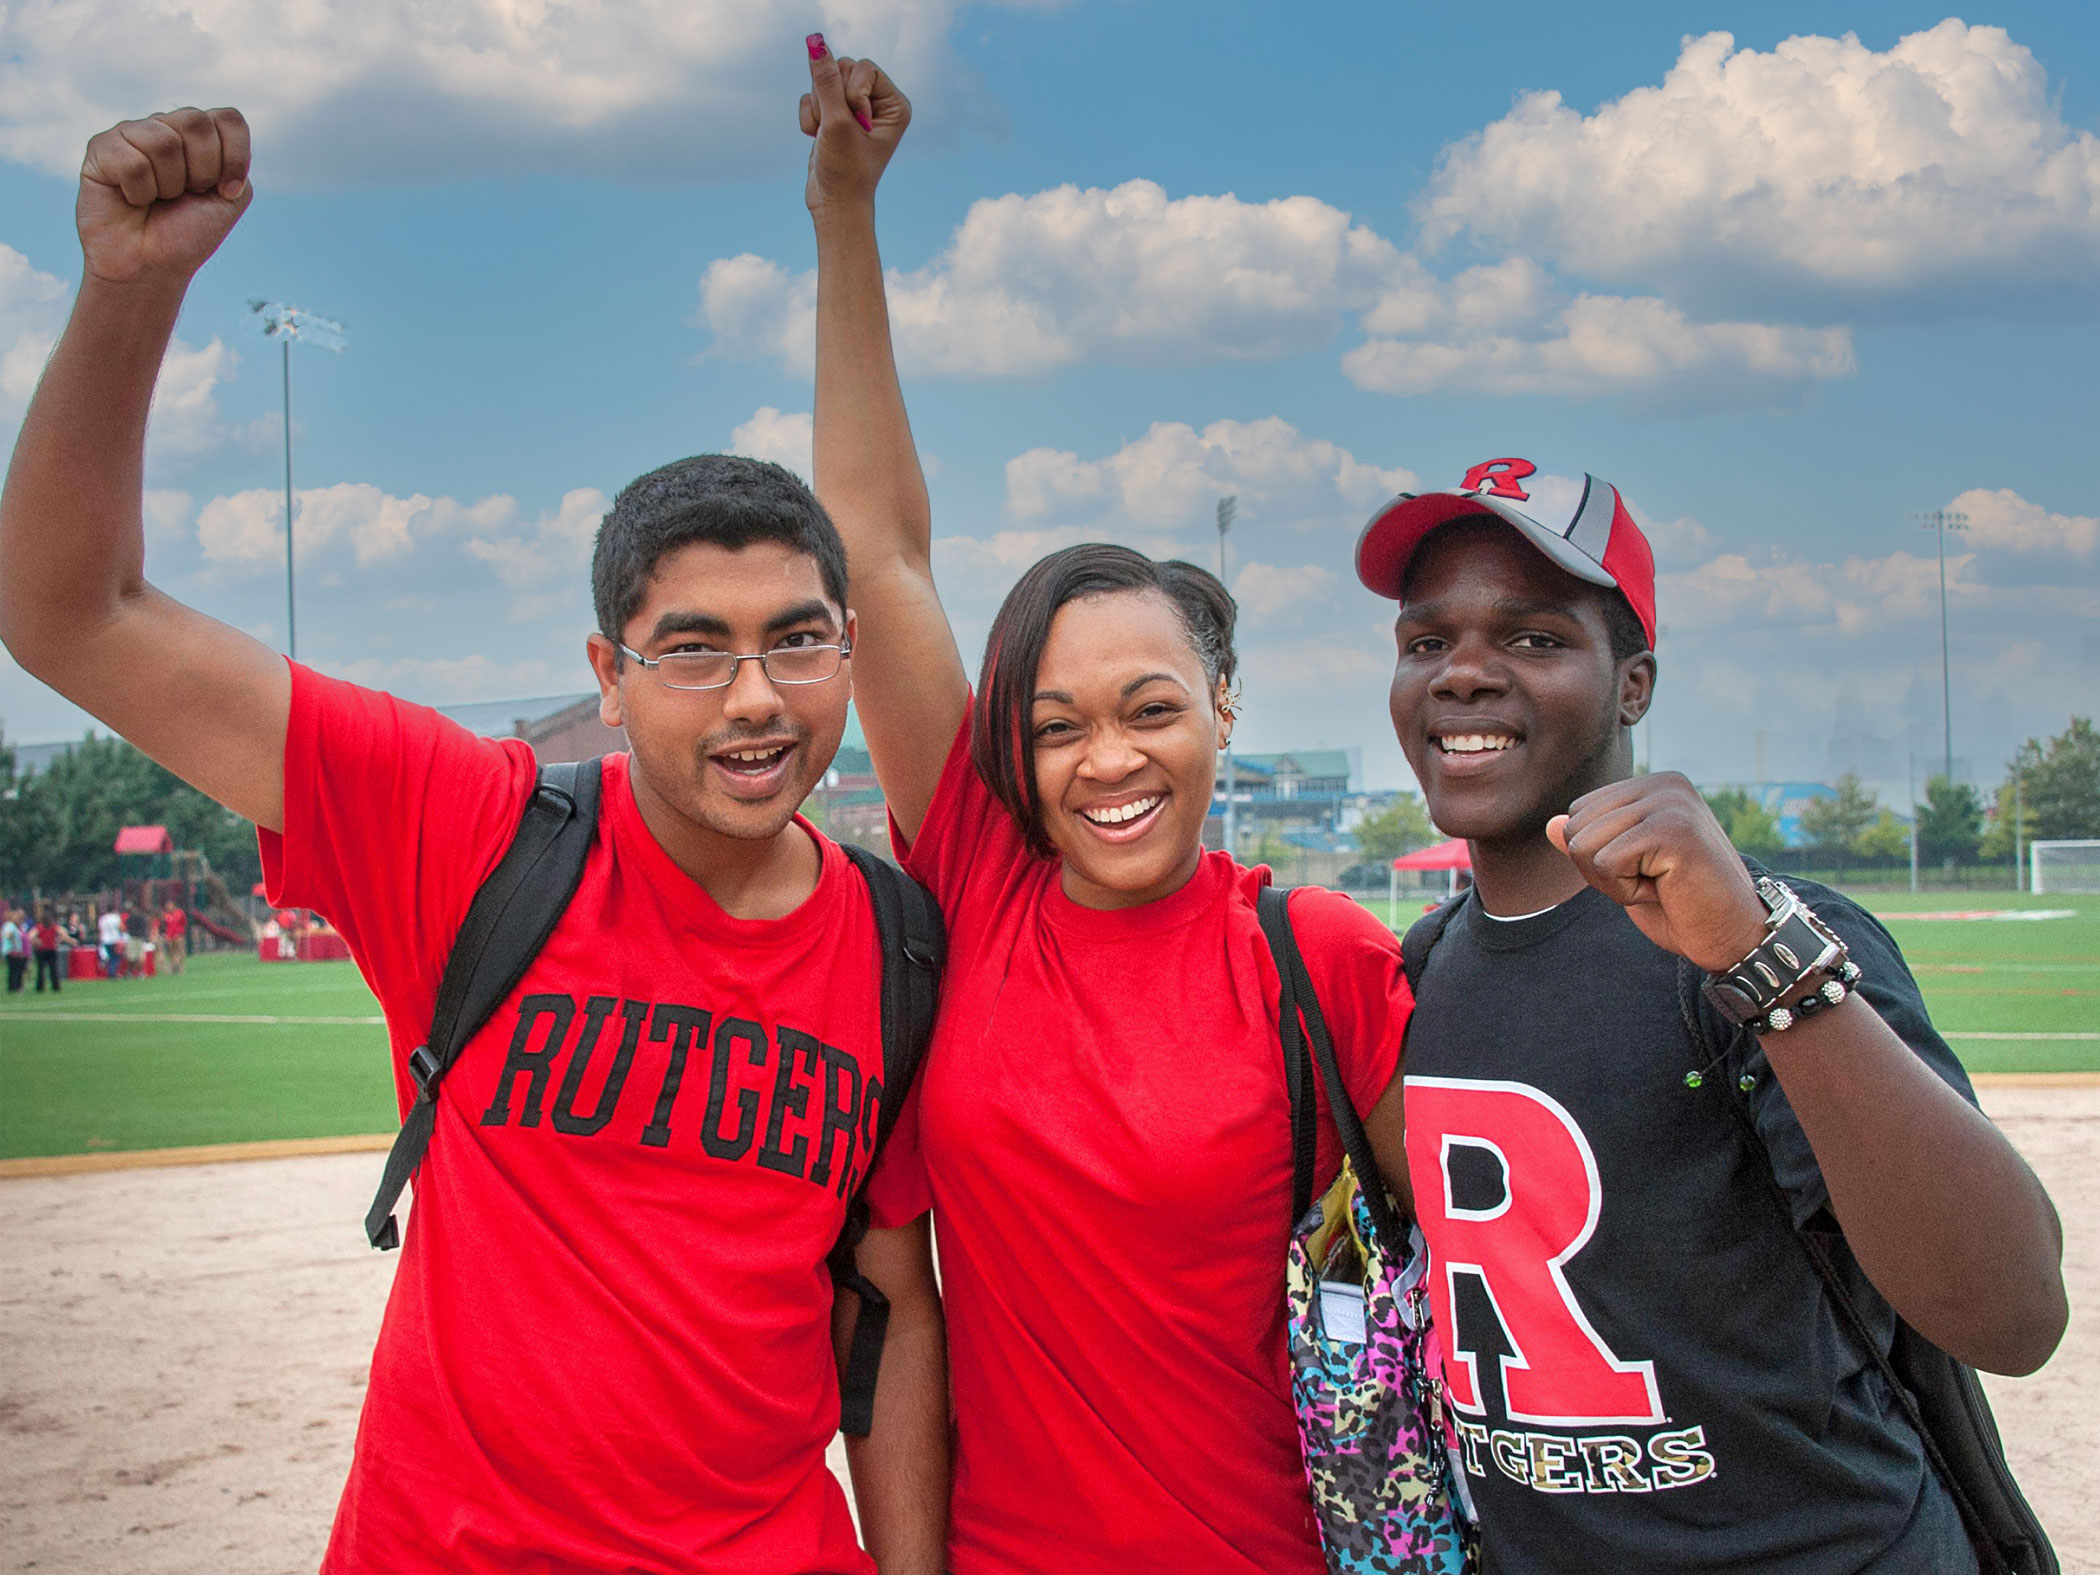 Where to for Rutgers University Apparel